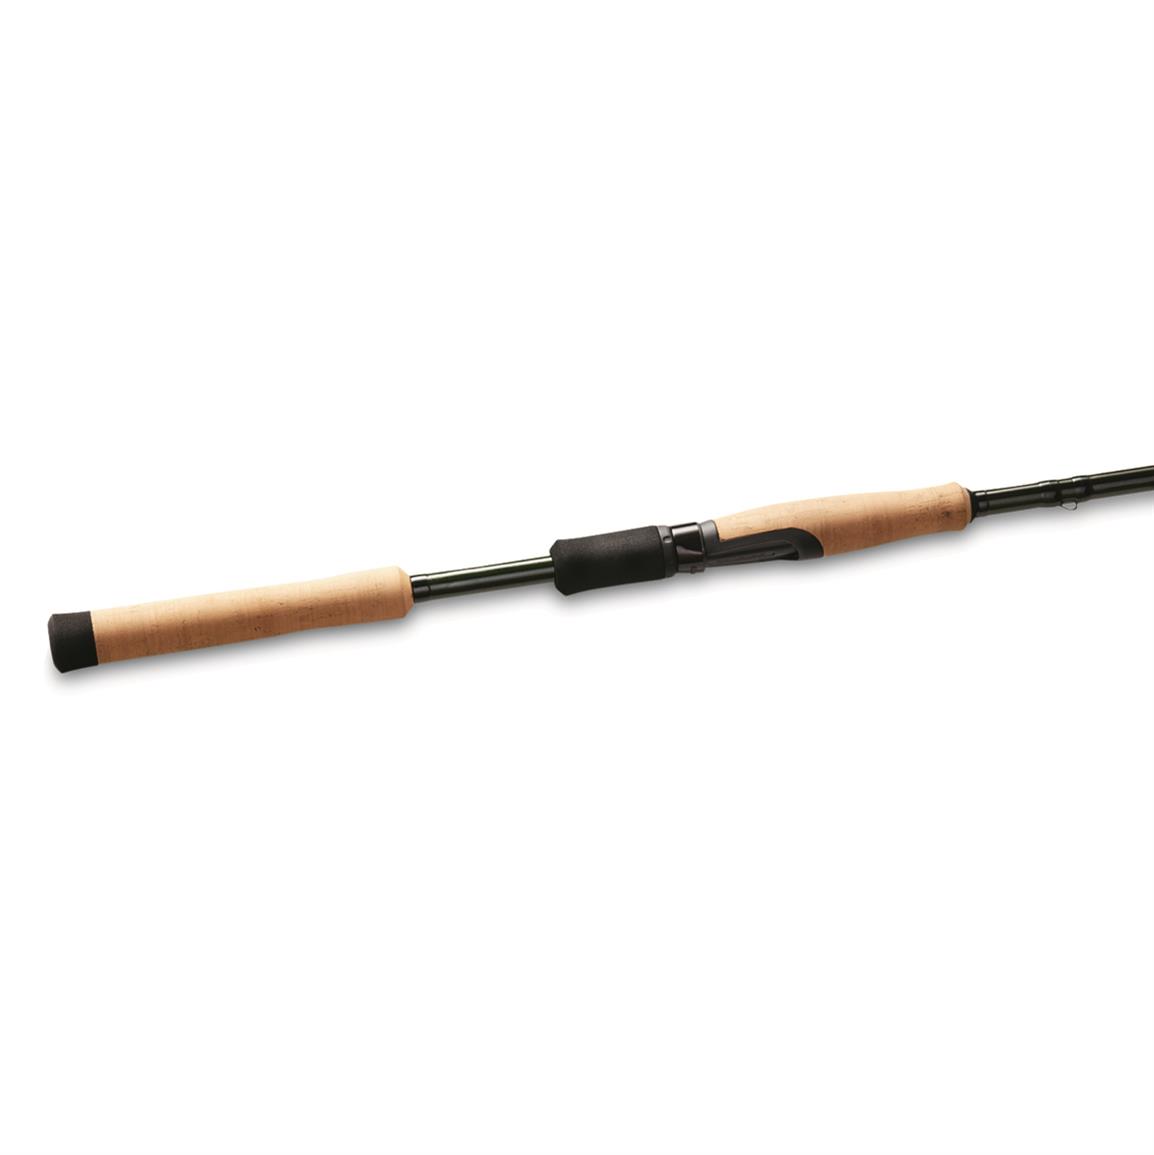 St. Croix Eyecon Series Spinning Rod, 6'6" Length, Medium Power, Fast Action